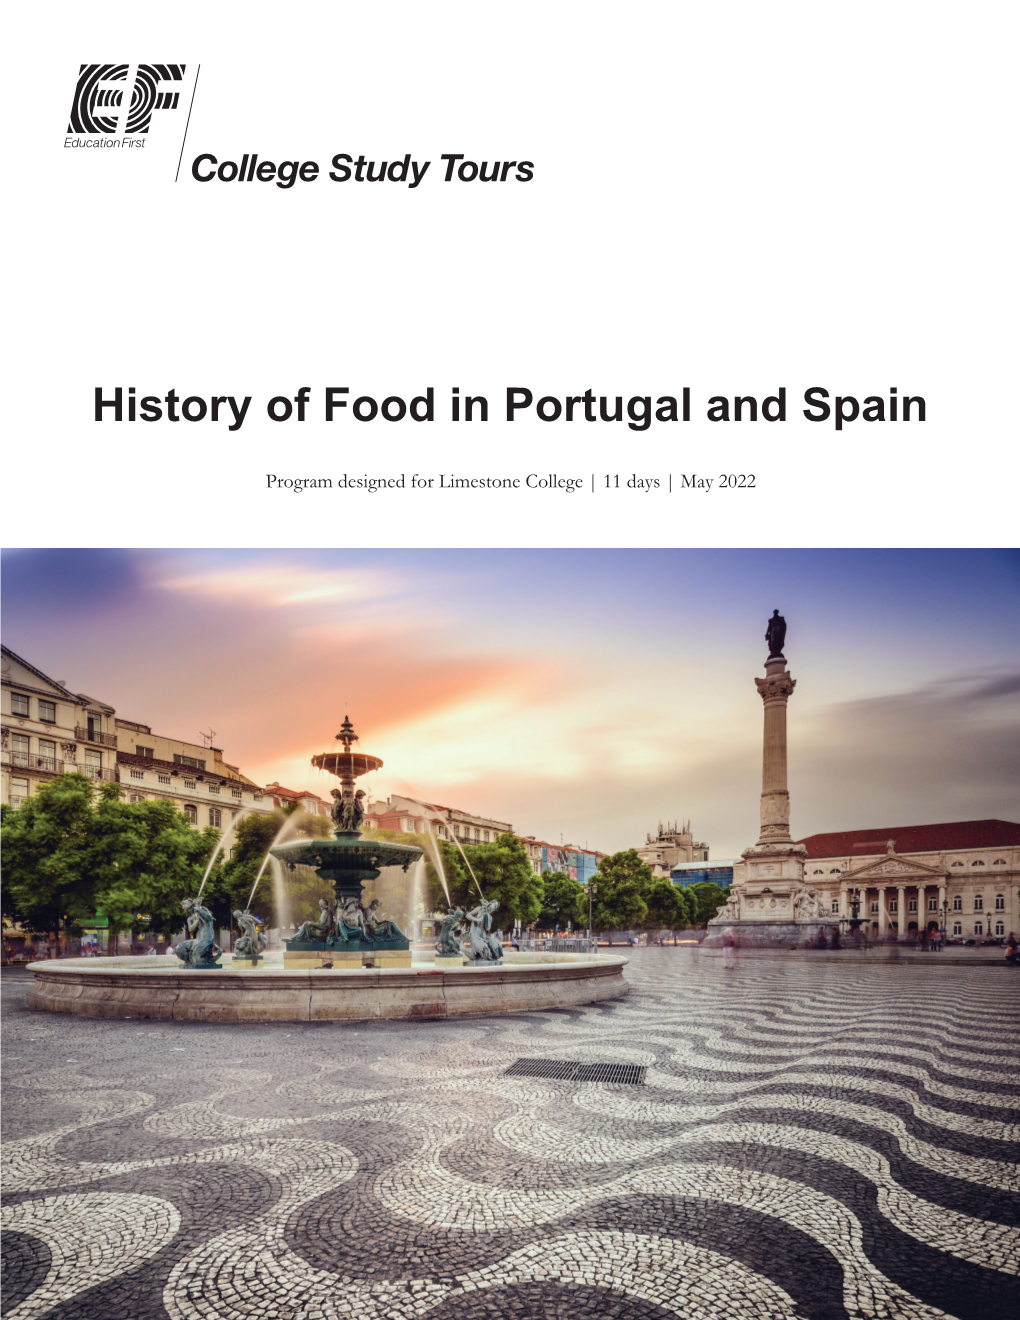 History of Food in Spain & Portugal Itinerary